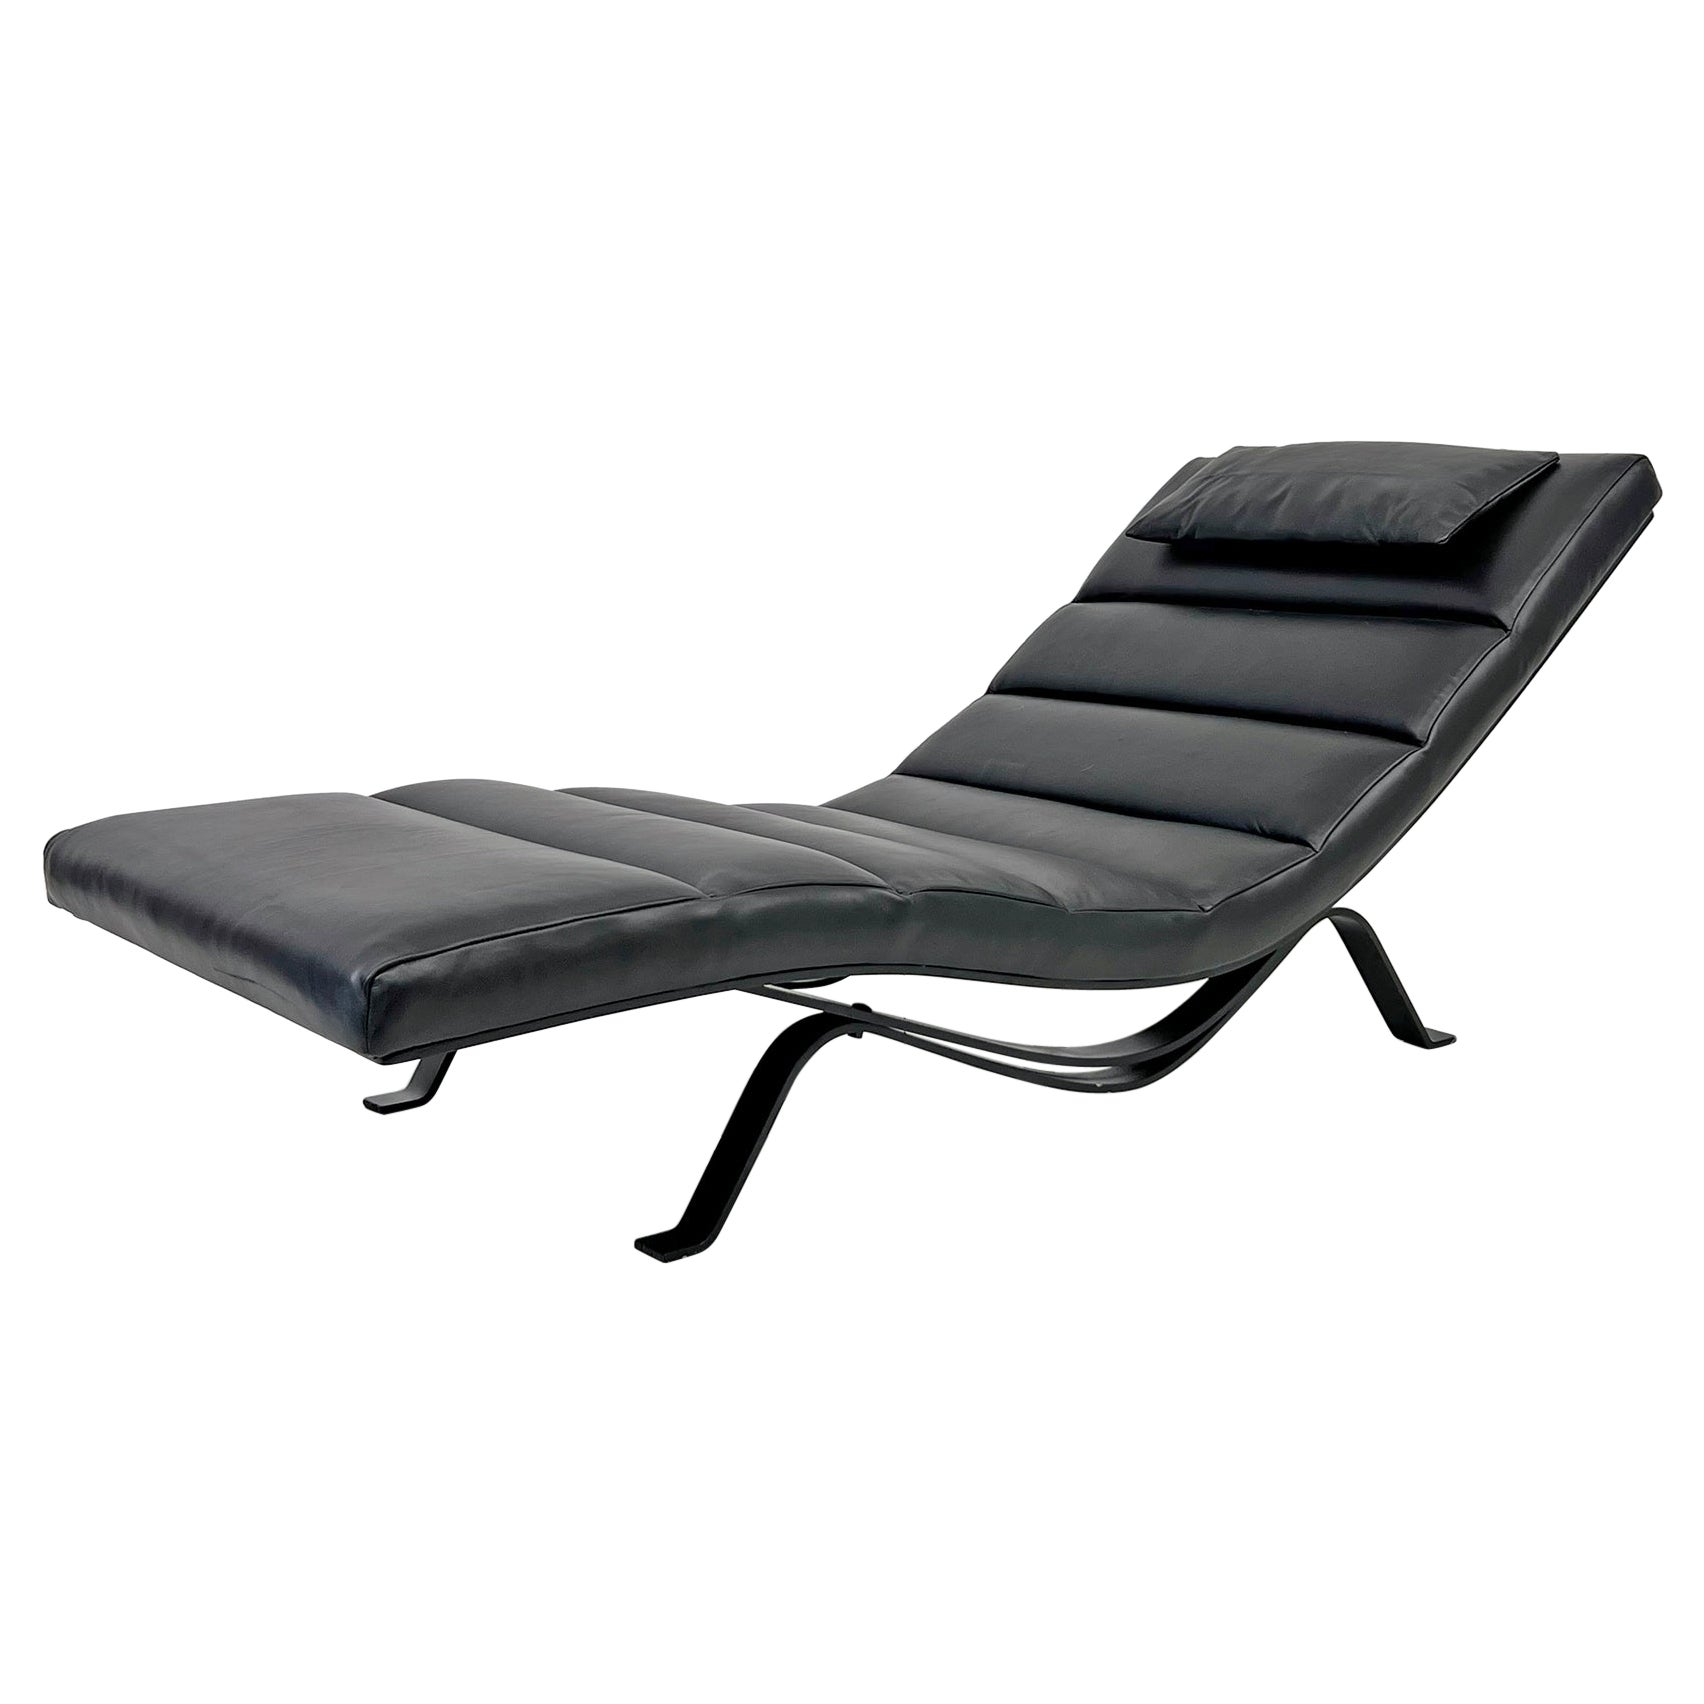 Early Rare Prototype for N° 5490 Chaise Lounge, George Nelson, 1953 For Sale